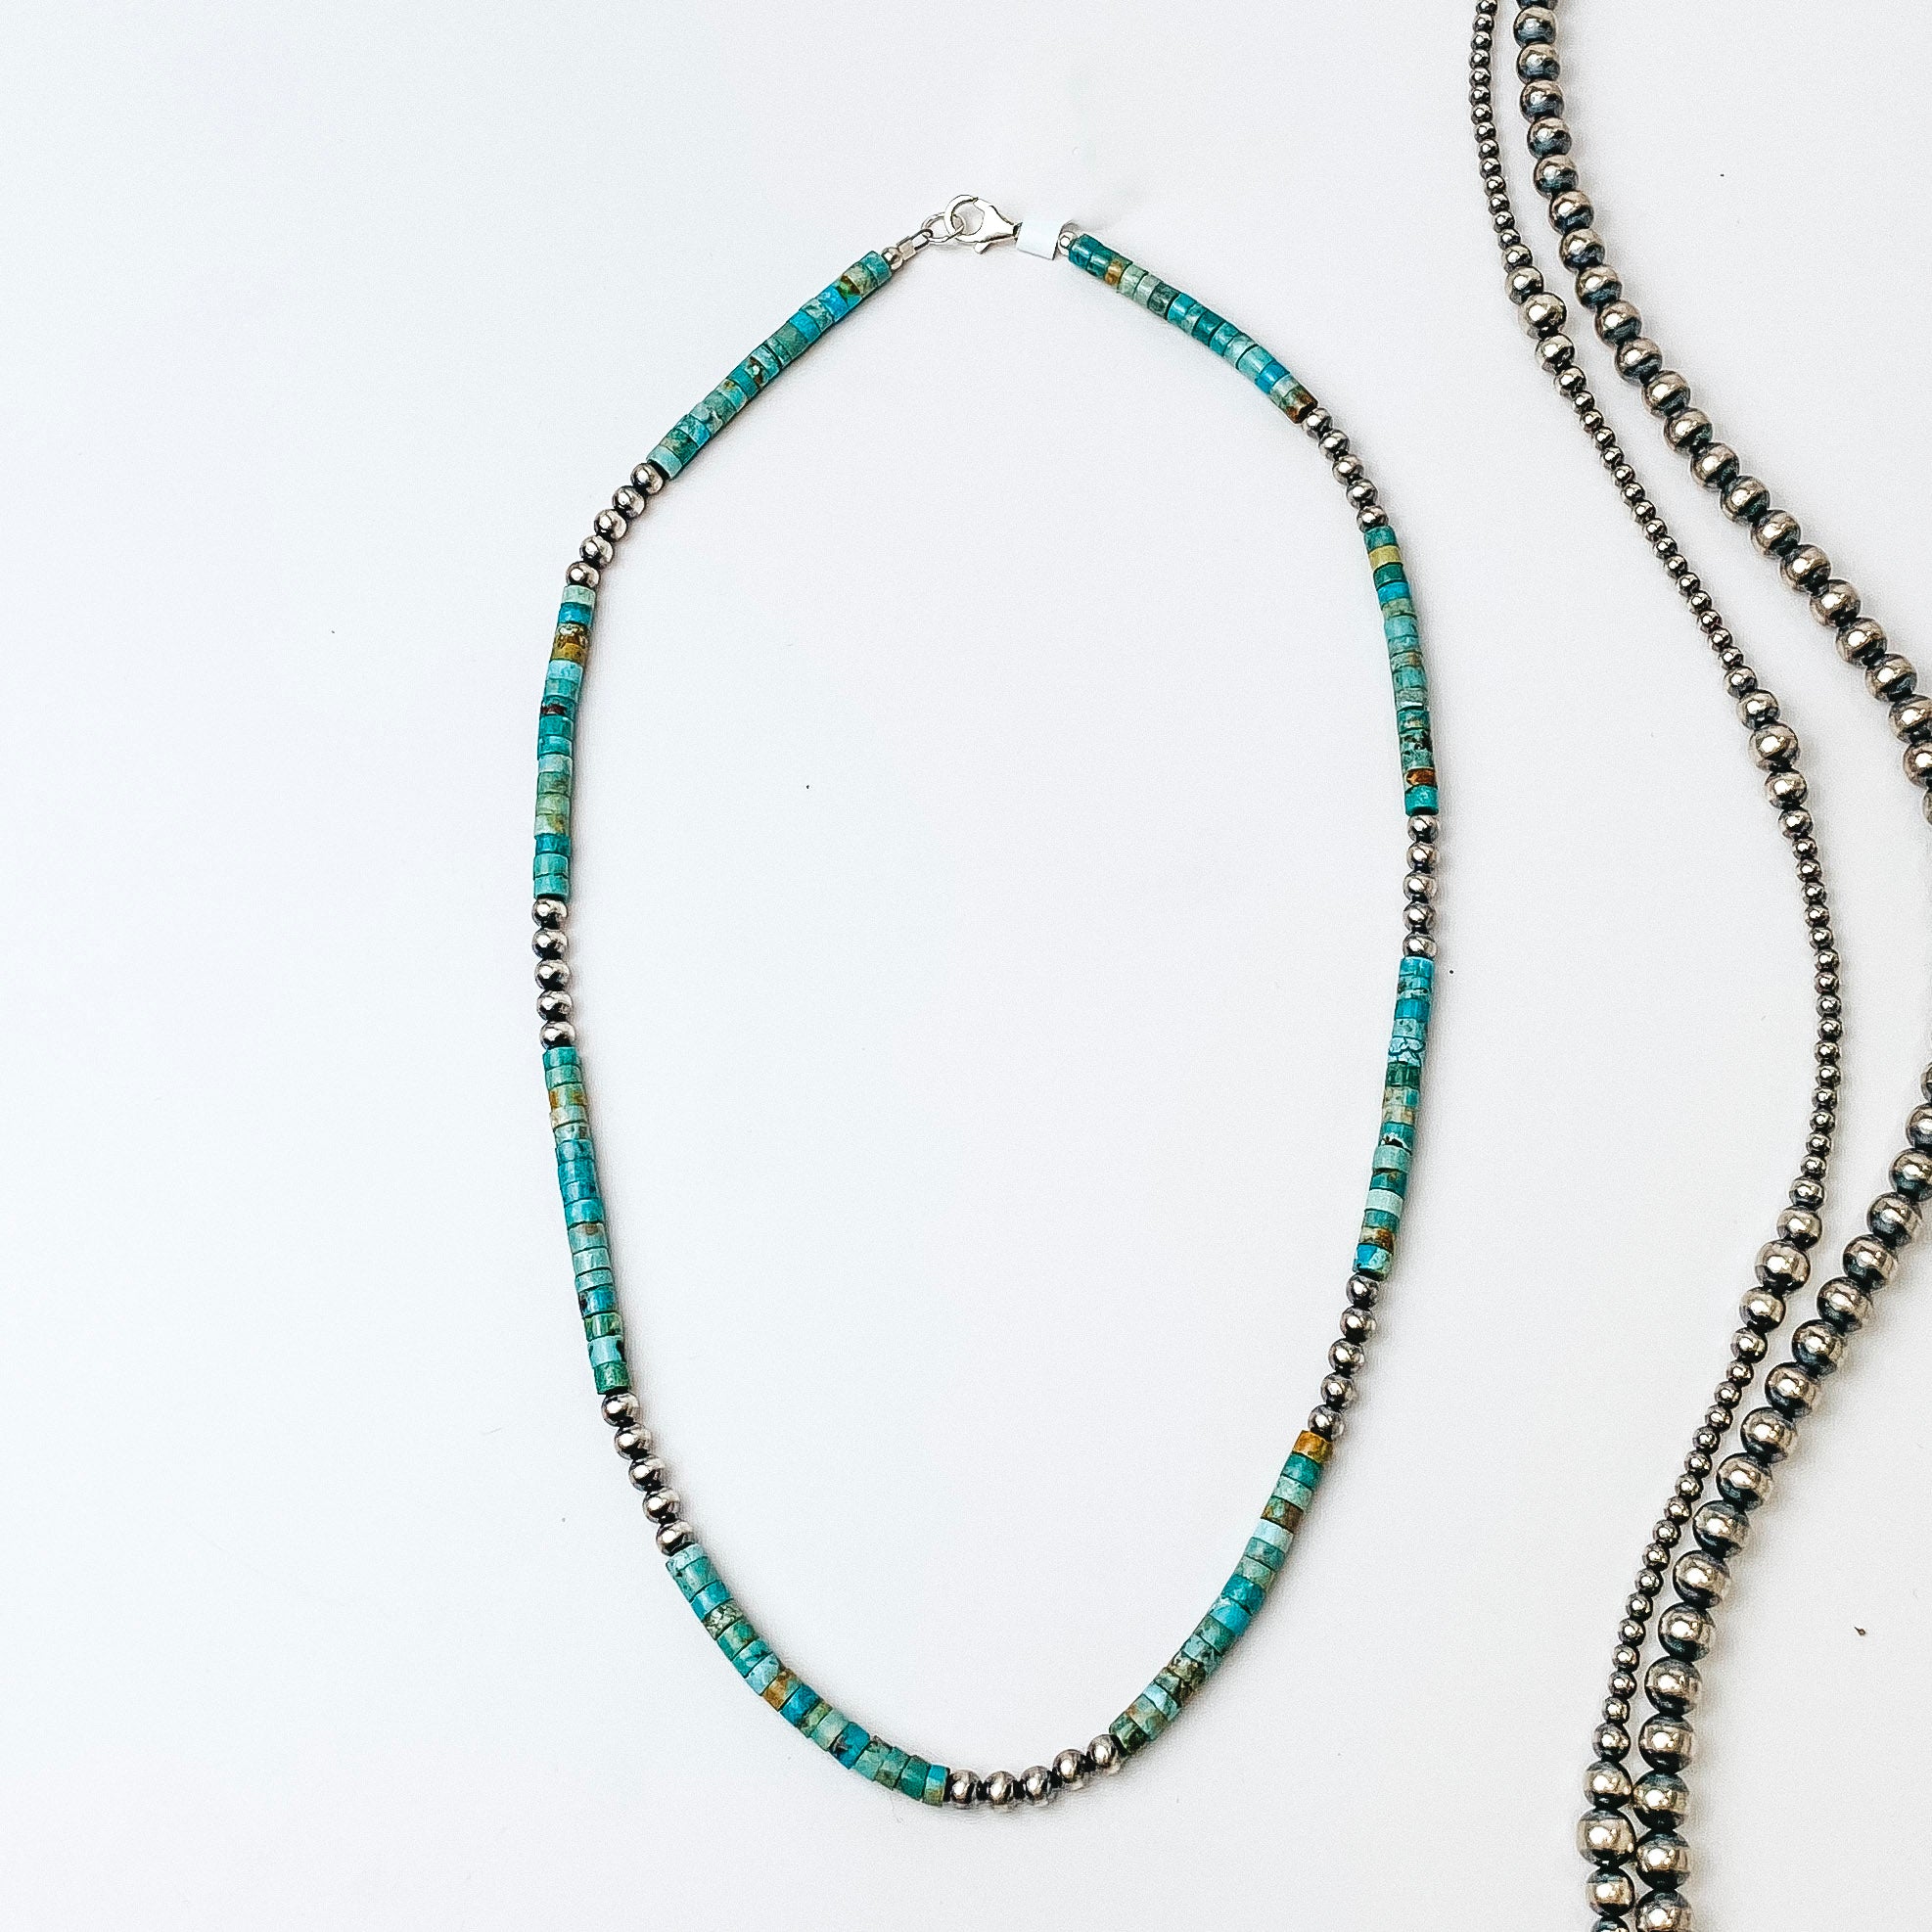 A necklace is centered in the middle of the picture with Navajo pearls laid to the right of the necklace. All on a white background.  